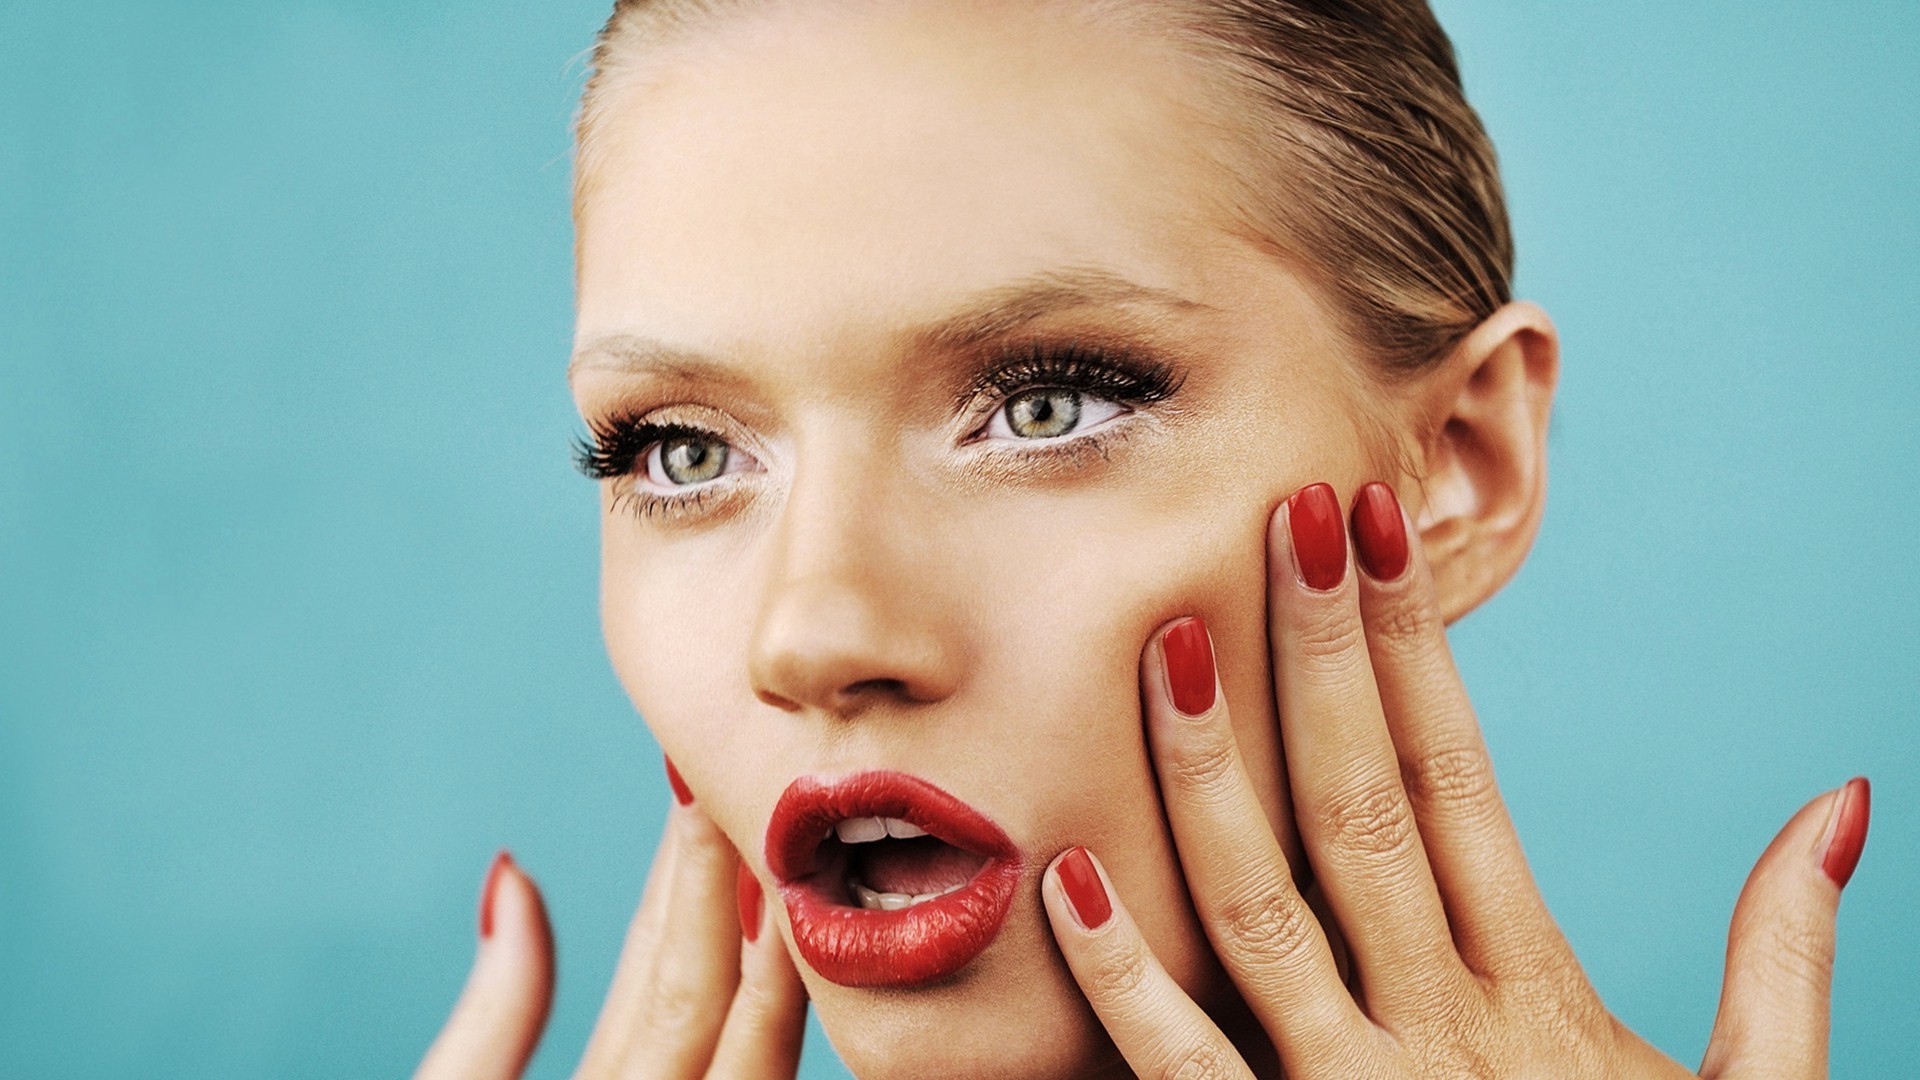 women, Blonde, Face, Model, Green Eyes, Red Lipstick, Red Nails, Painted Nails, Colored Nails, Martina Dimitrova Wallpaper